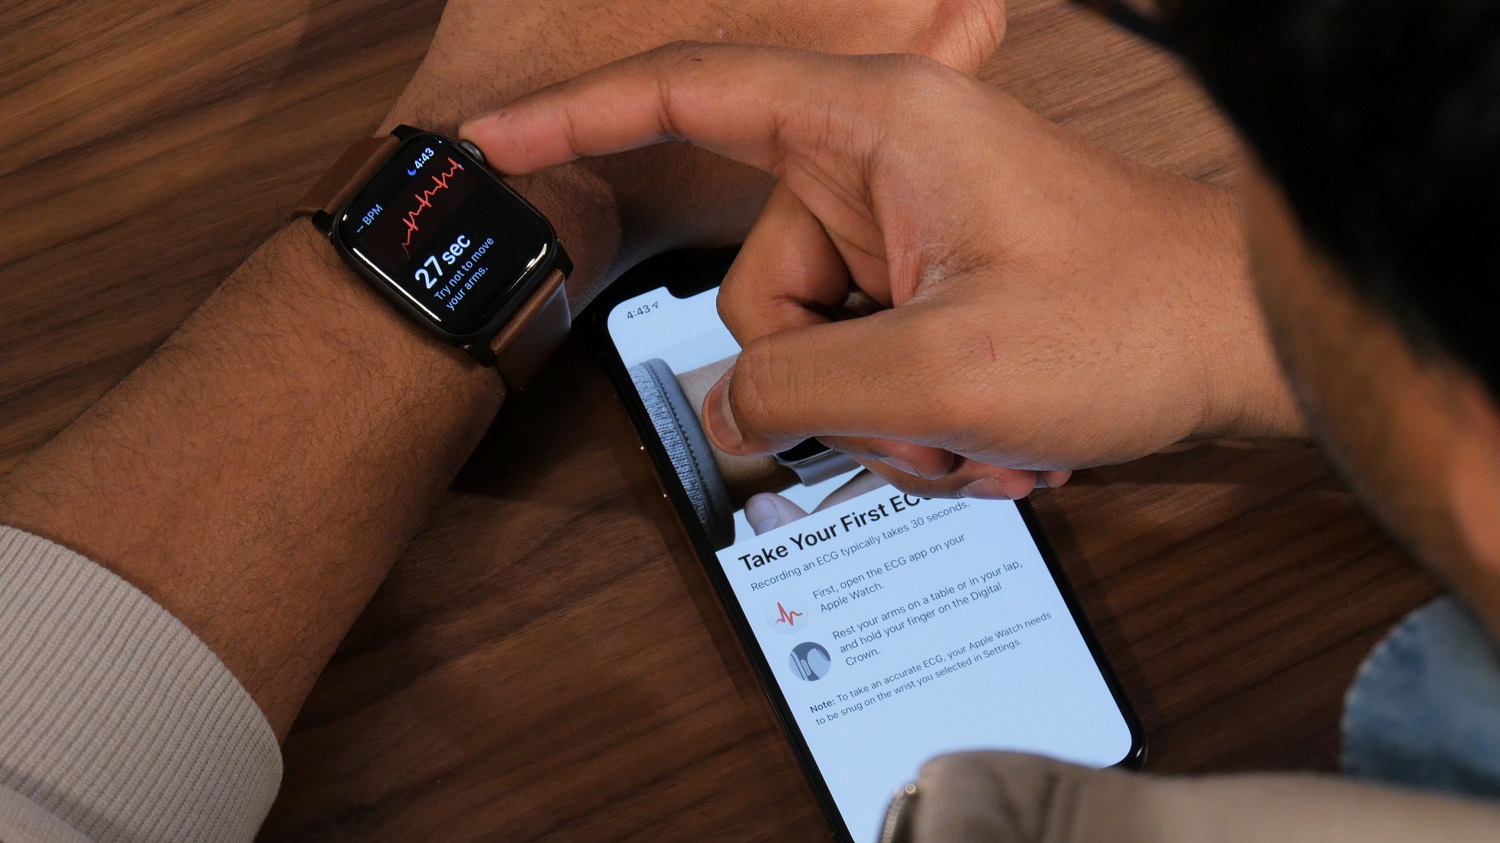 Take an ECG with the ECG app on Apple Watch - Apple Support